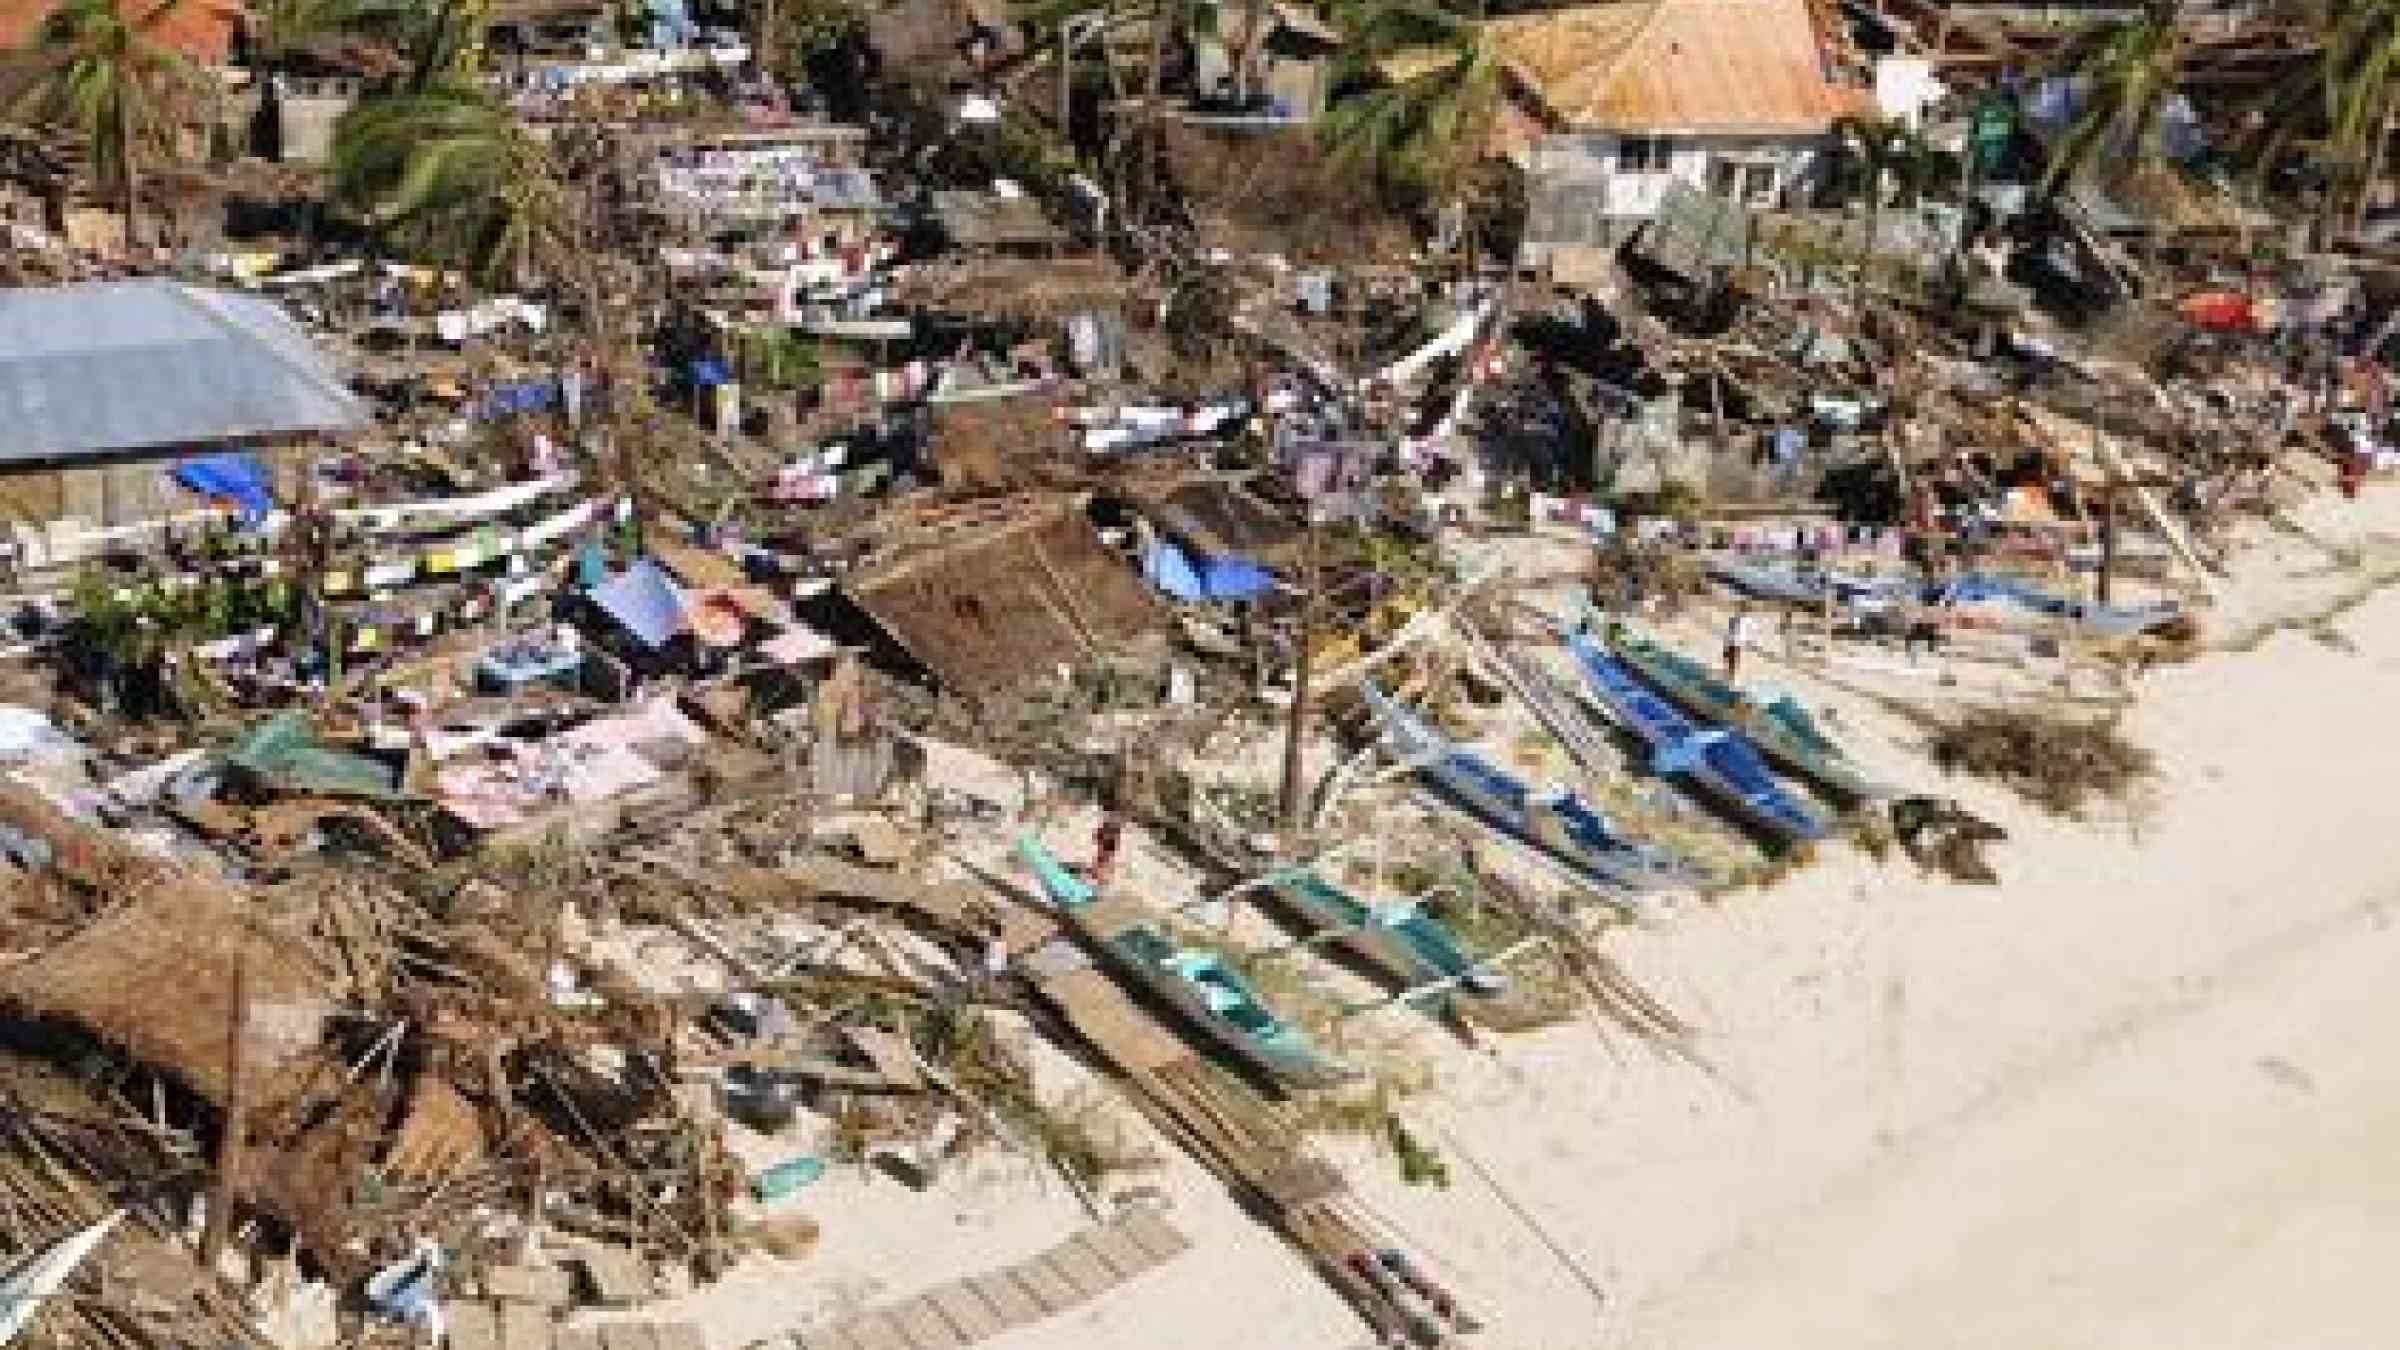 Typhoon Haiyan left a massive swath of destruction in many coastal communities in central Philippines.